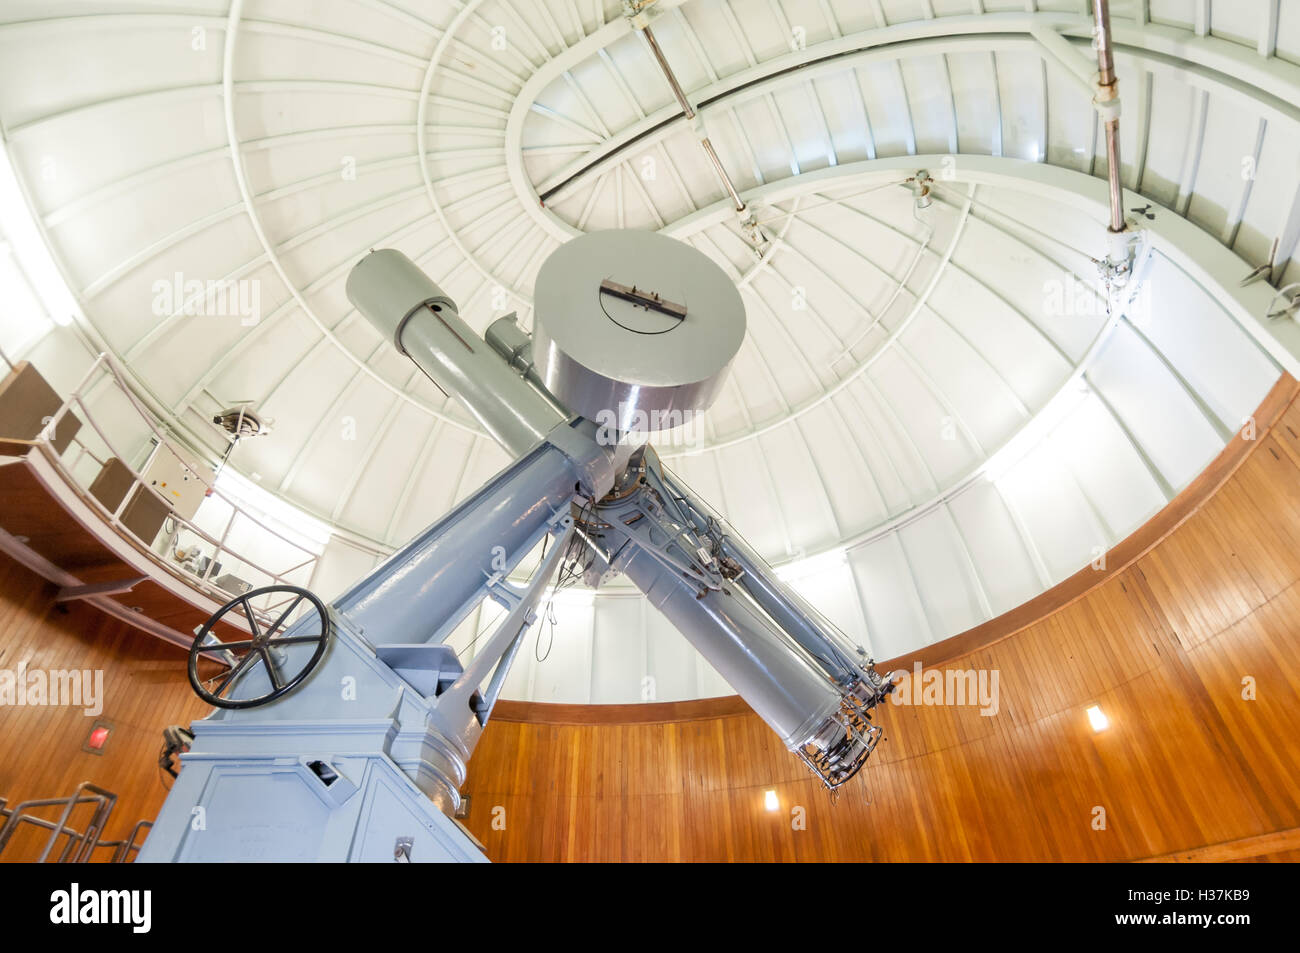 L'Osservatorio Science Center at Herstmonceux, ex Royal Observatory di Greenwich Foto Stock